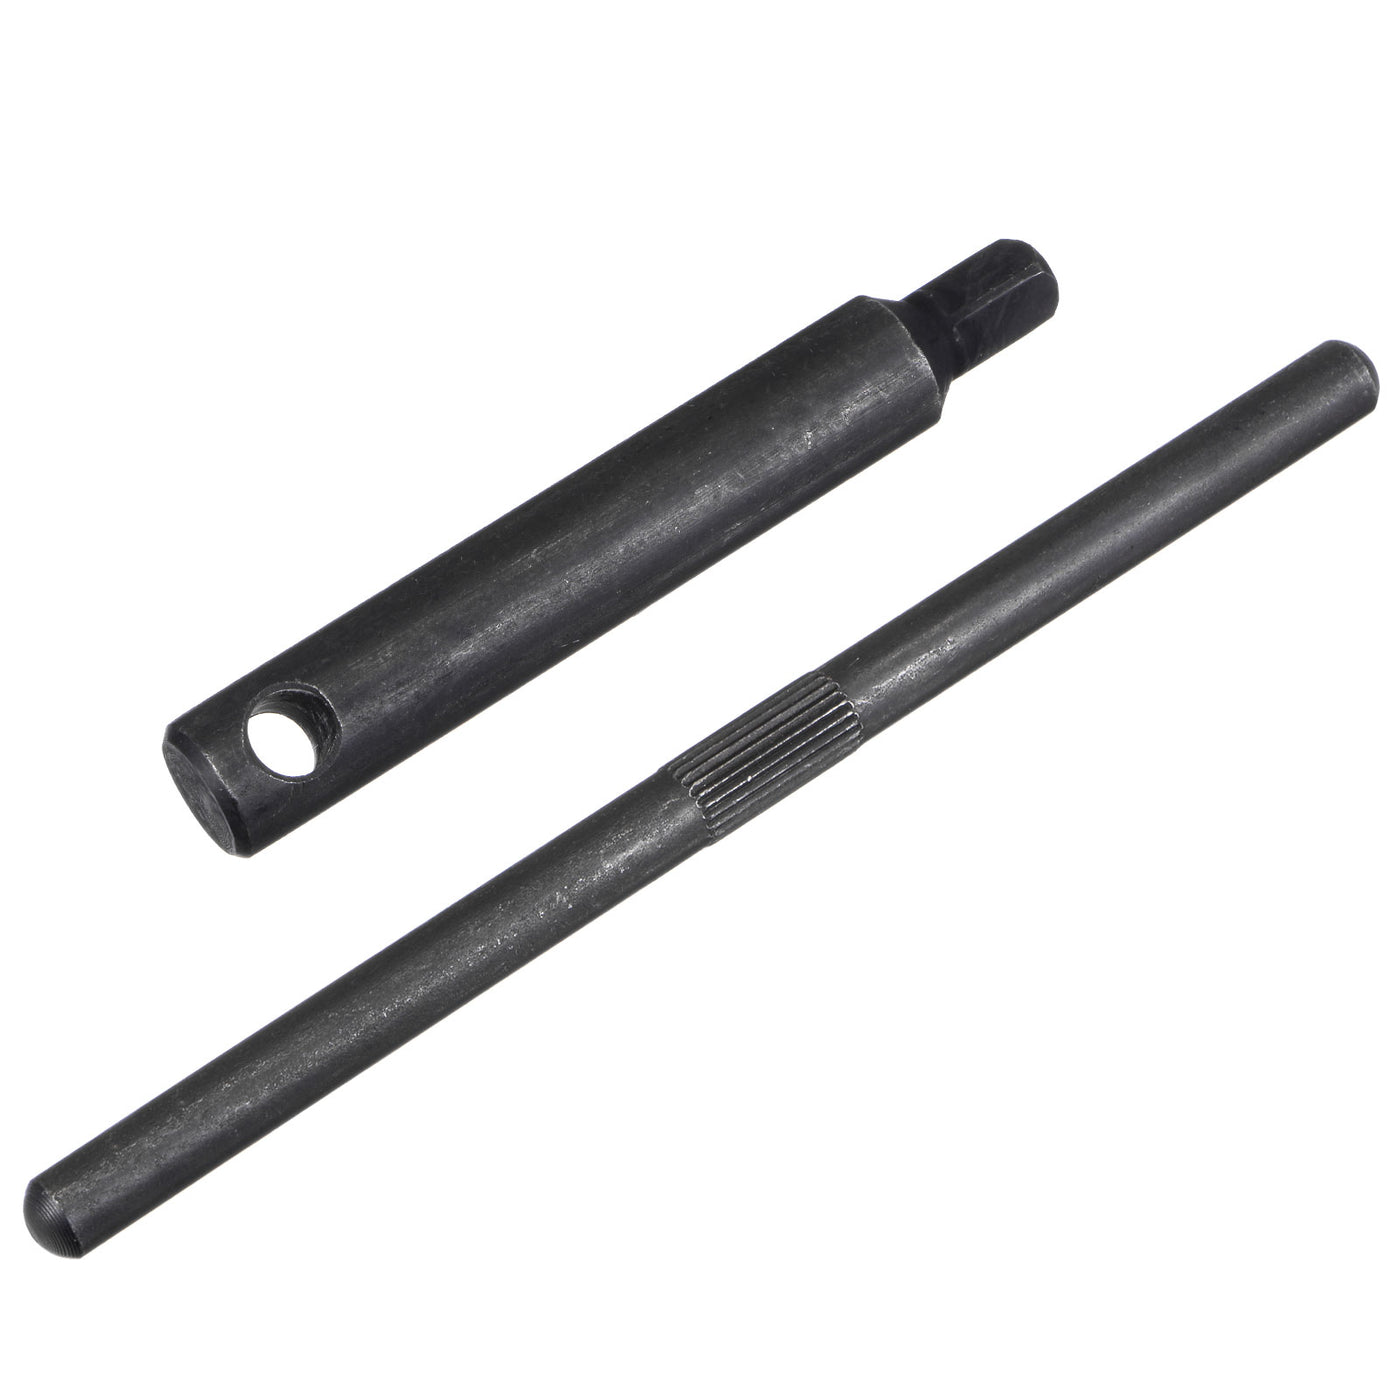 Uxcell Uxcell Lathe Chuck Wrench, 14mm Square Head Key Spanner Tool, 2 Pcs (L200x250mm)